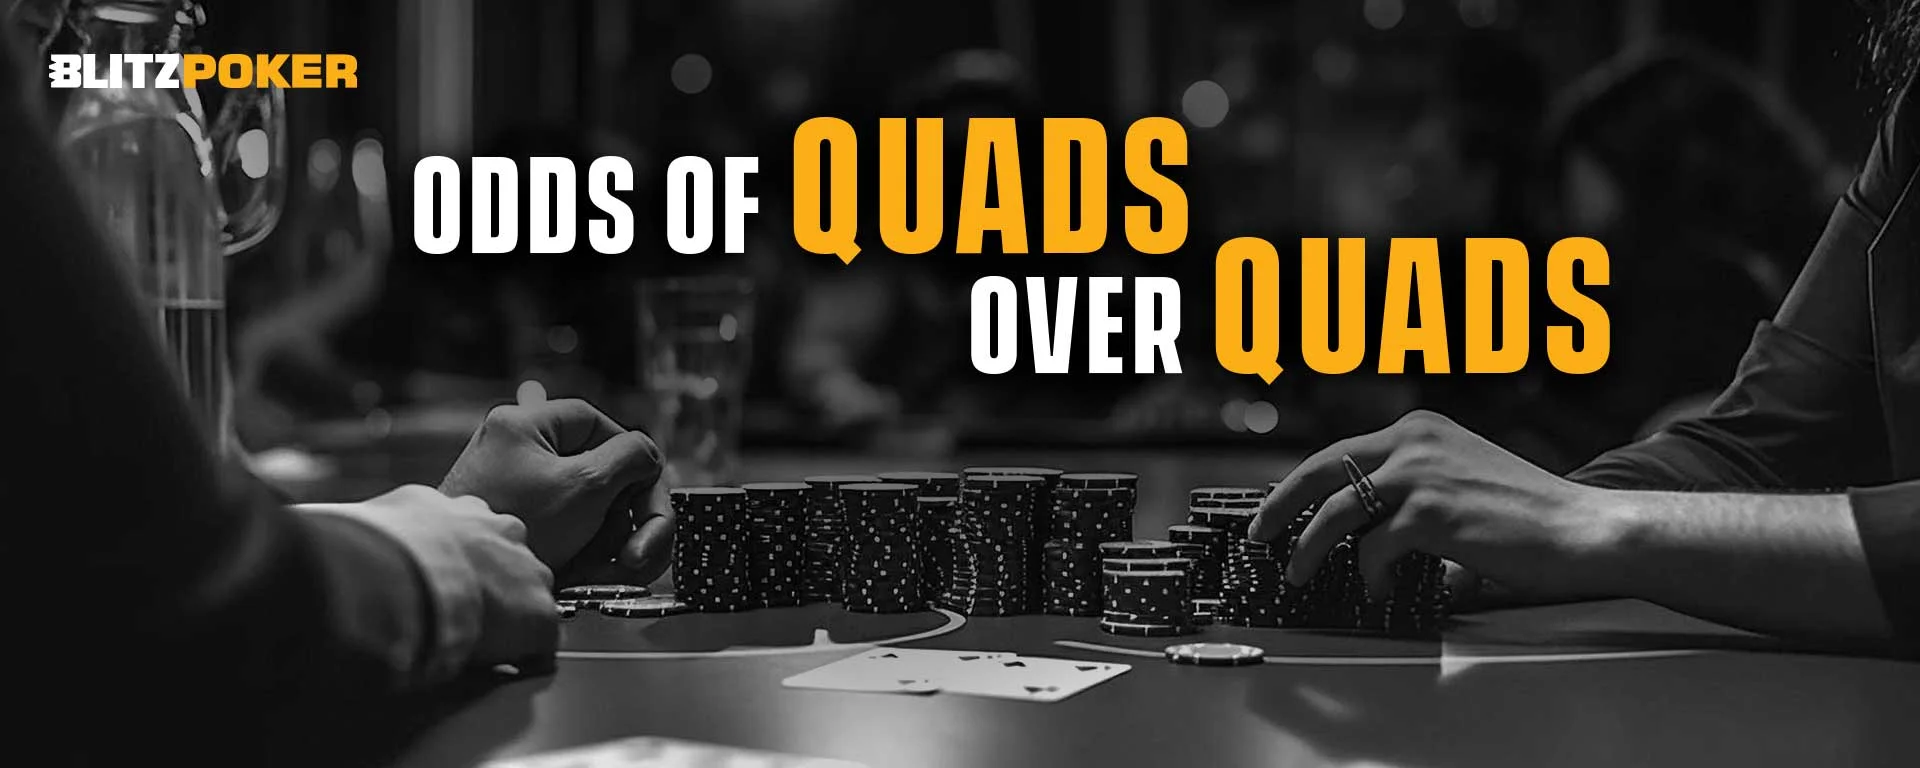 Odds of Quads Over Quads in Texas Holdem